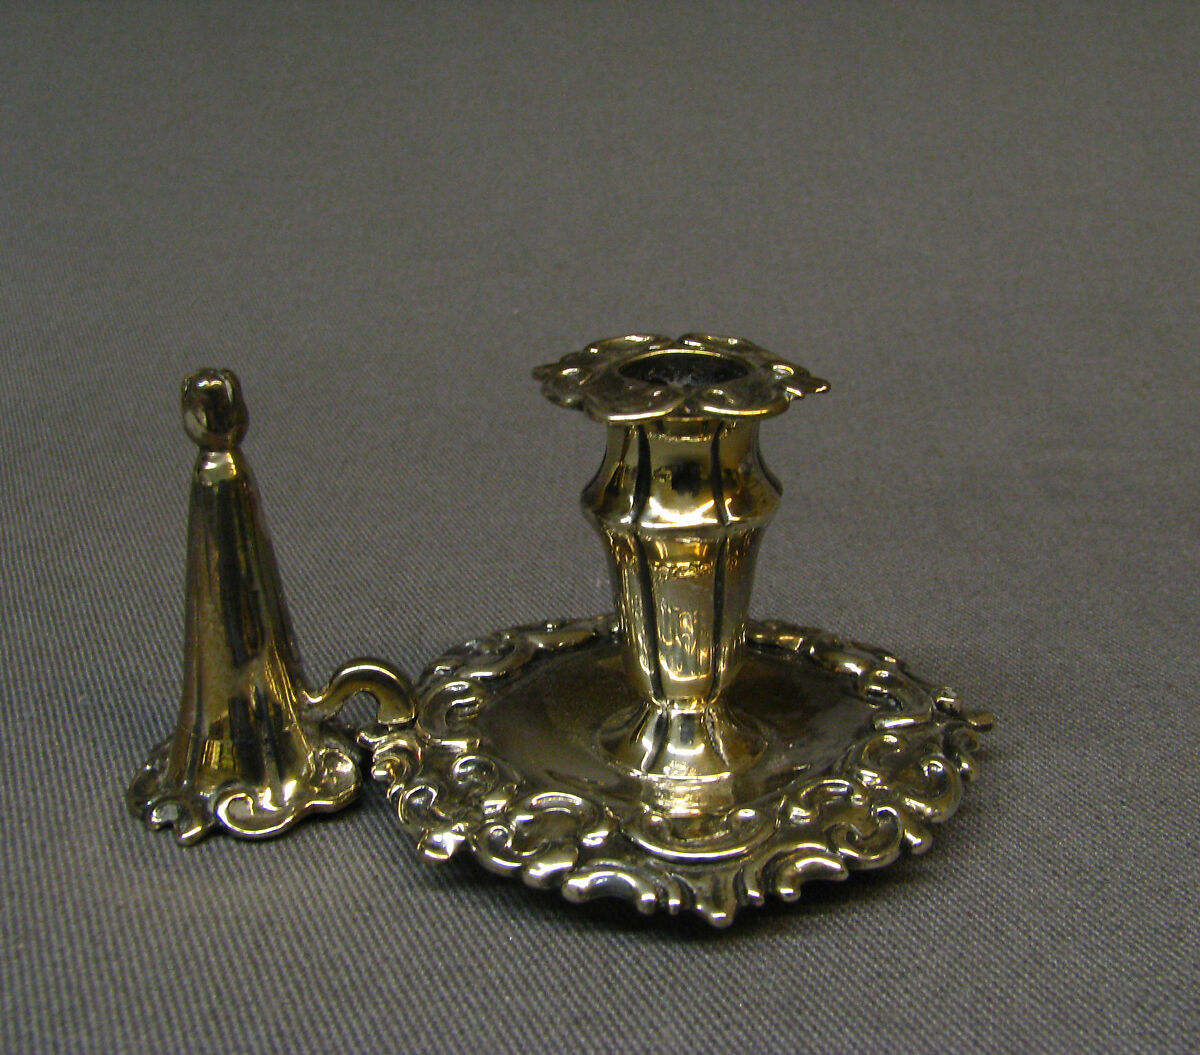 Taperstick, George Reid (active 1811–after 1849), Silver, British, London 